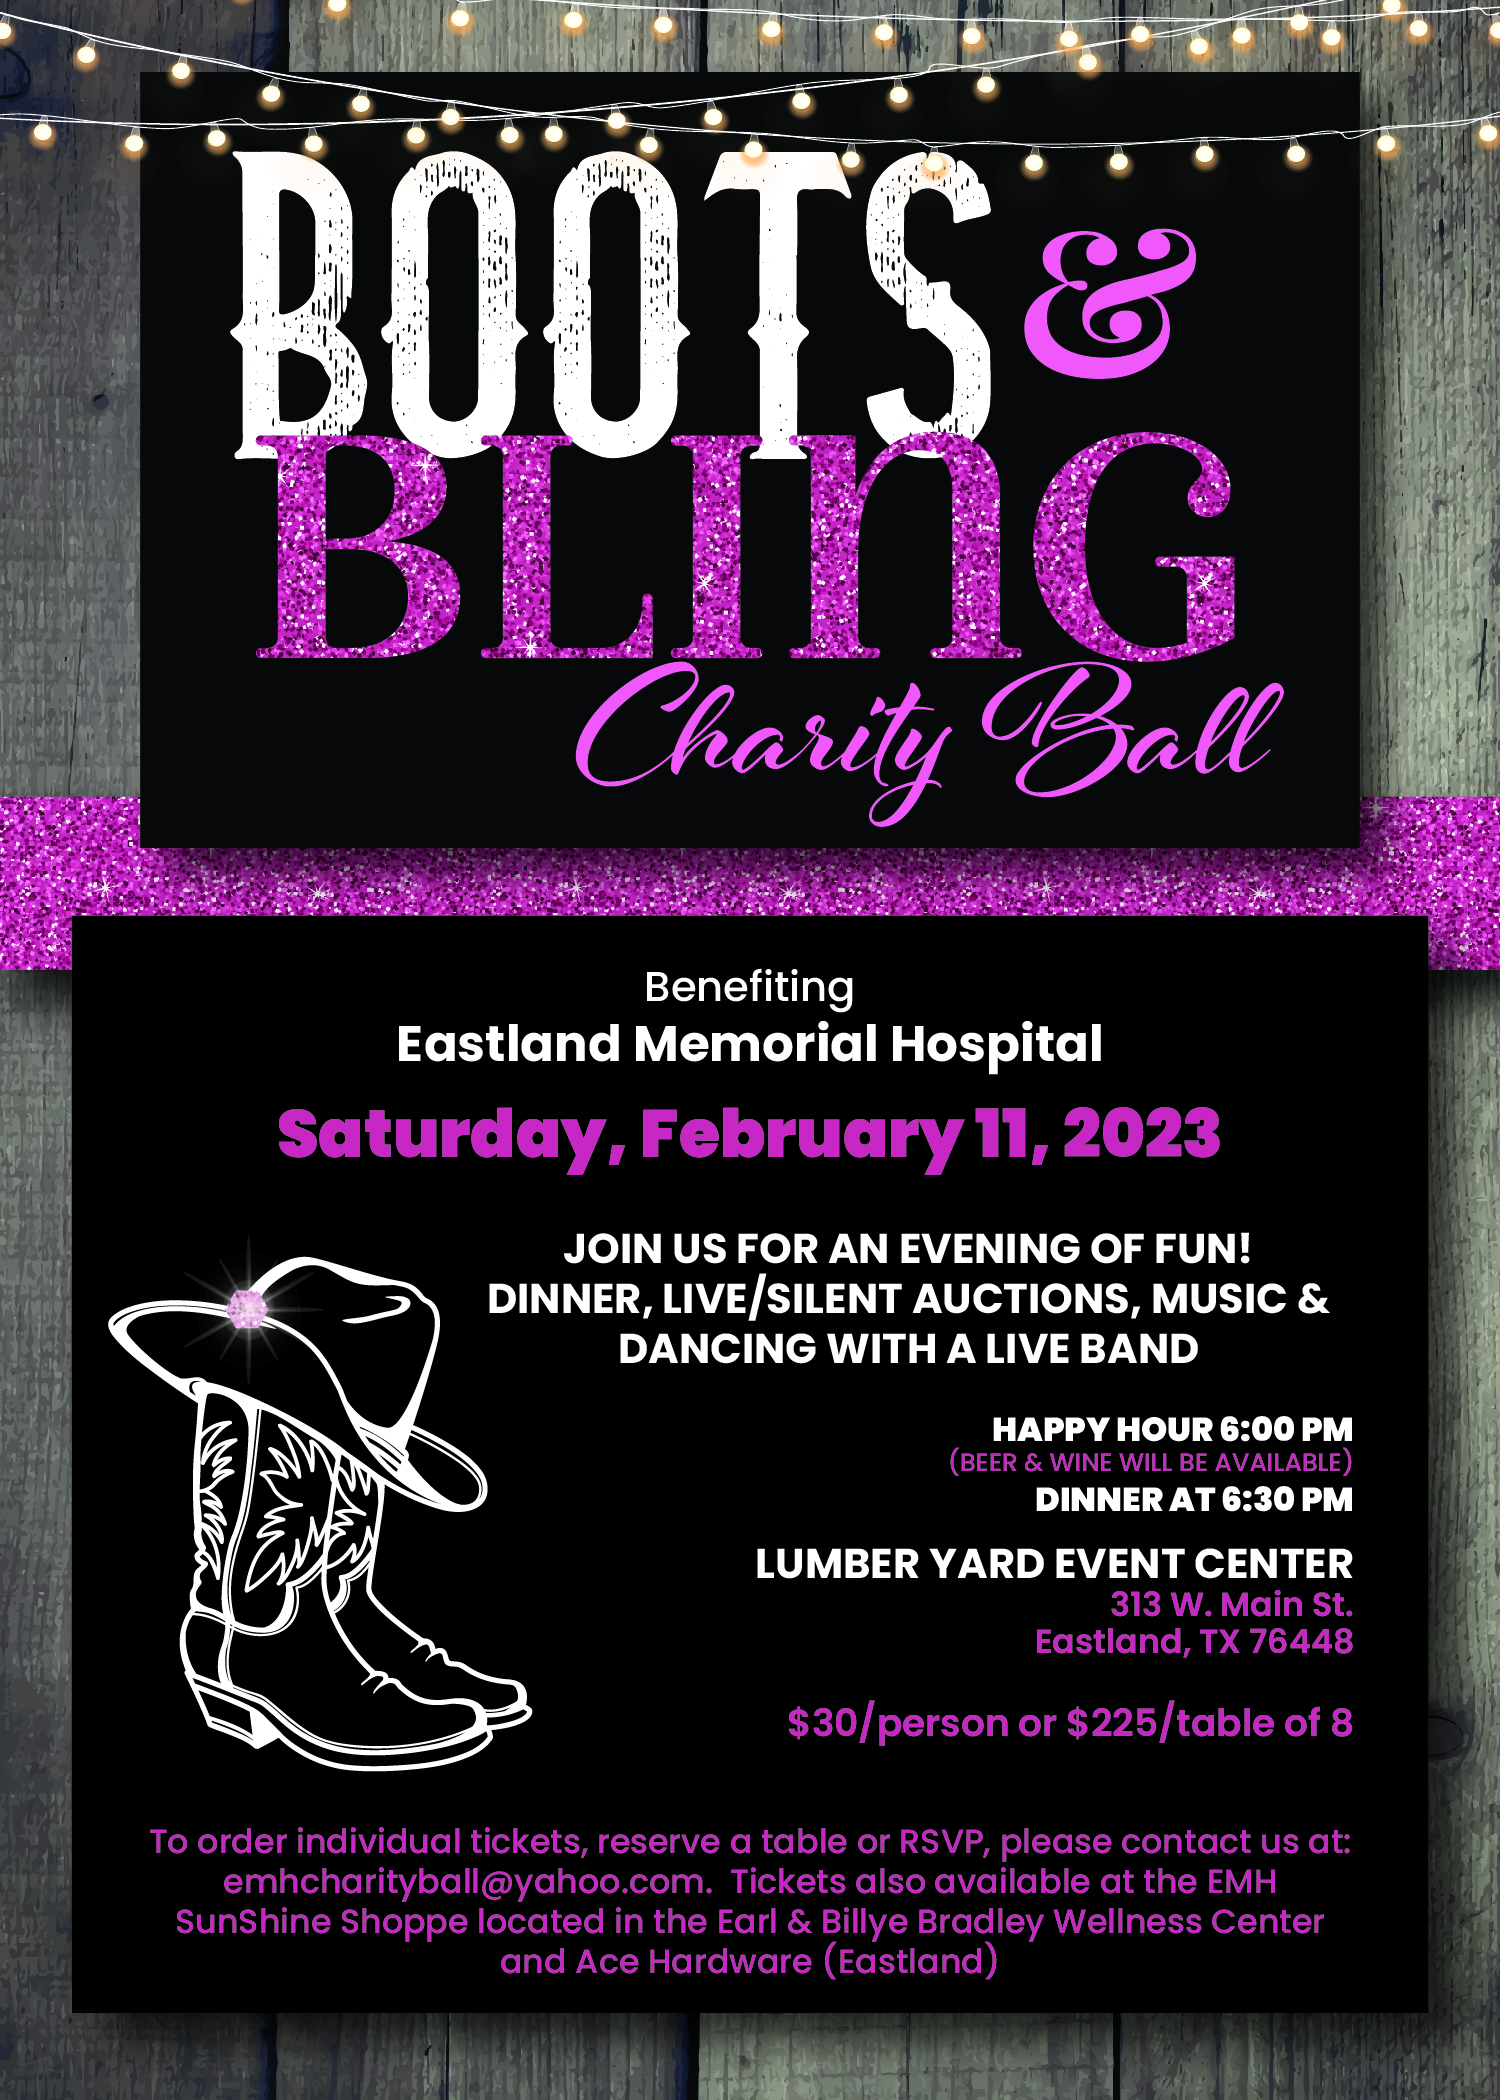 An Evening of Fun! Dinner, Live/Silent Auctions, Music & Dancing with a Live Band. Benefiting Eastland Memorial Hospital...